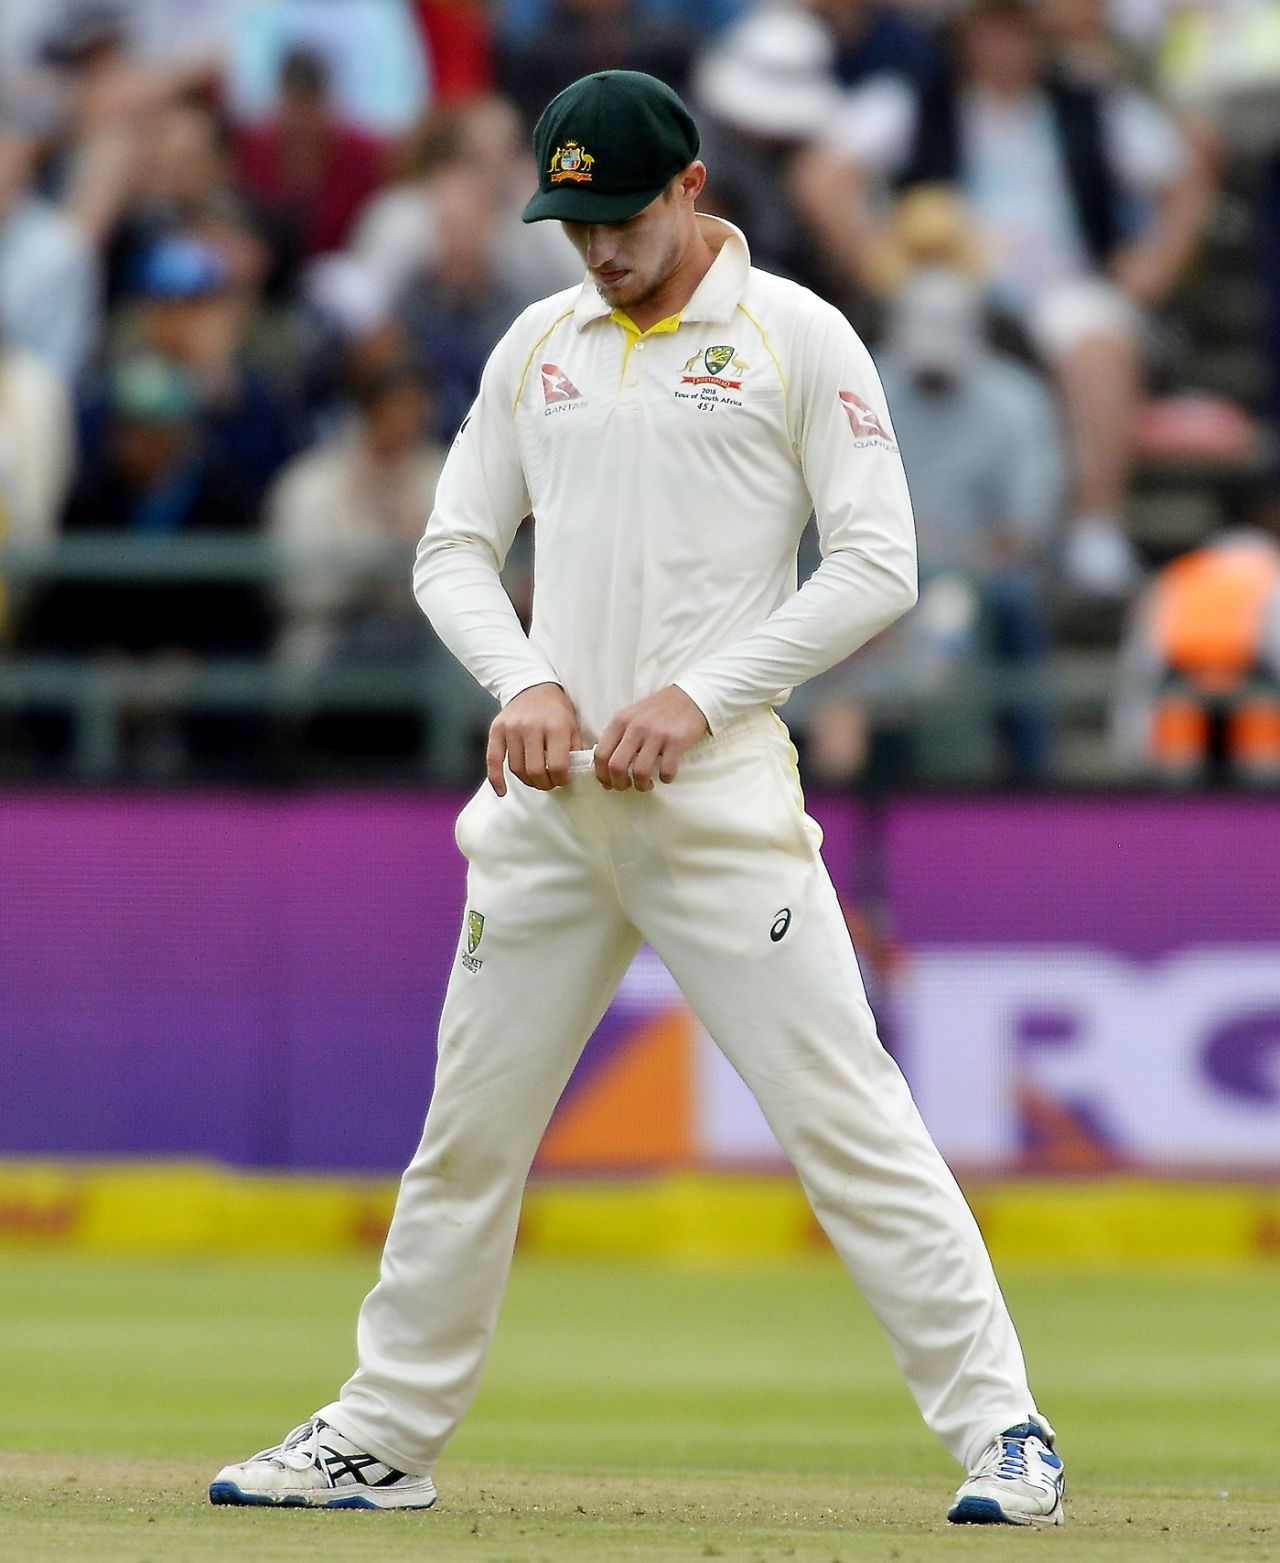 Cameron Bancroft's pants came under scrutiny, South Africa v Australia, 3rd Test, Cape Town, 3rd day, March 24, 2018